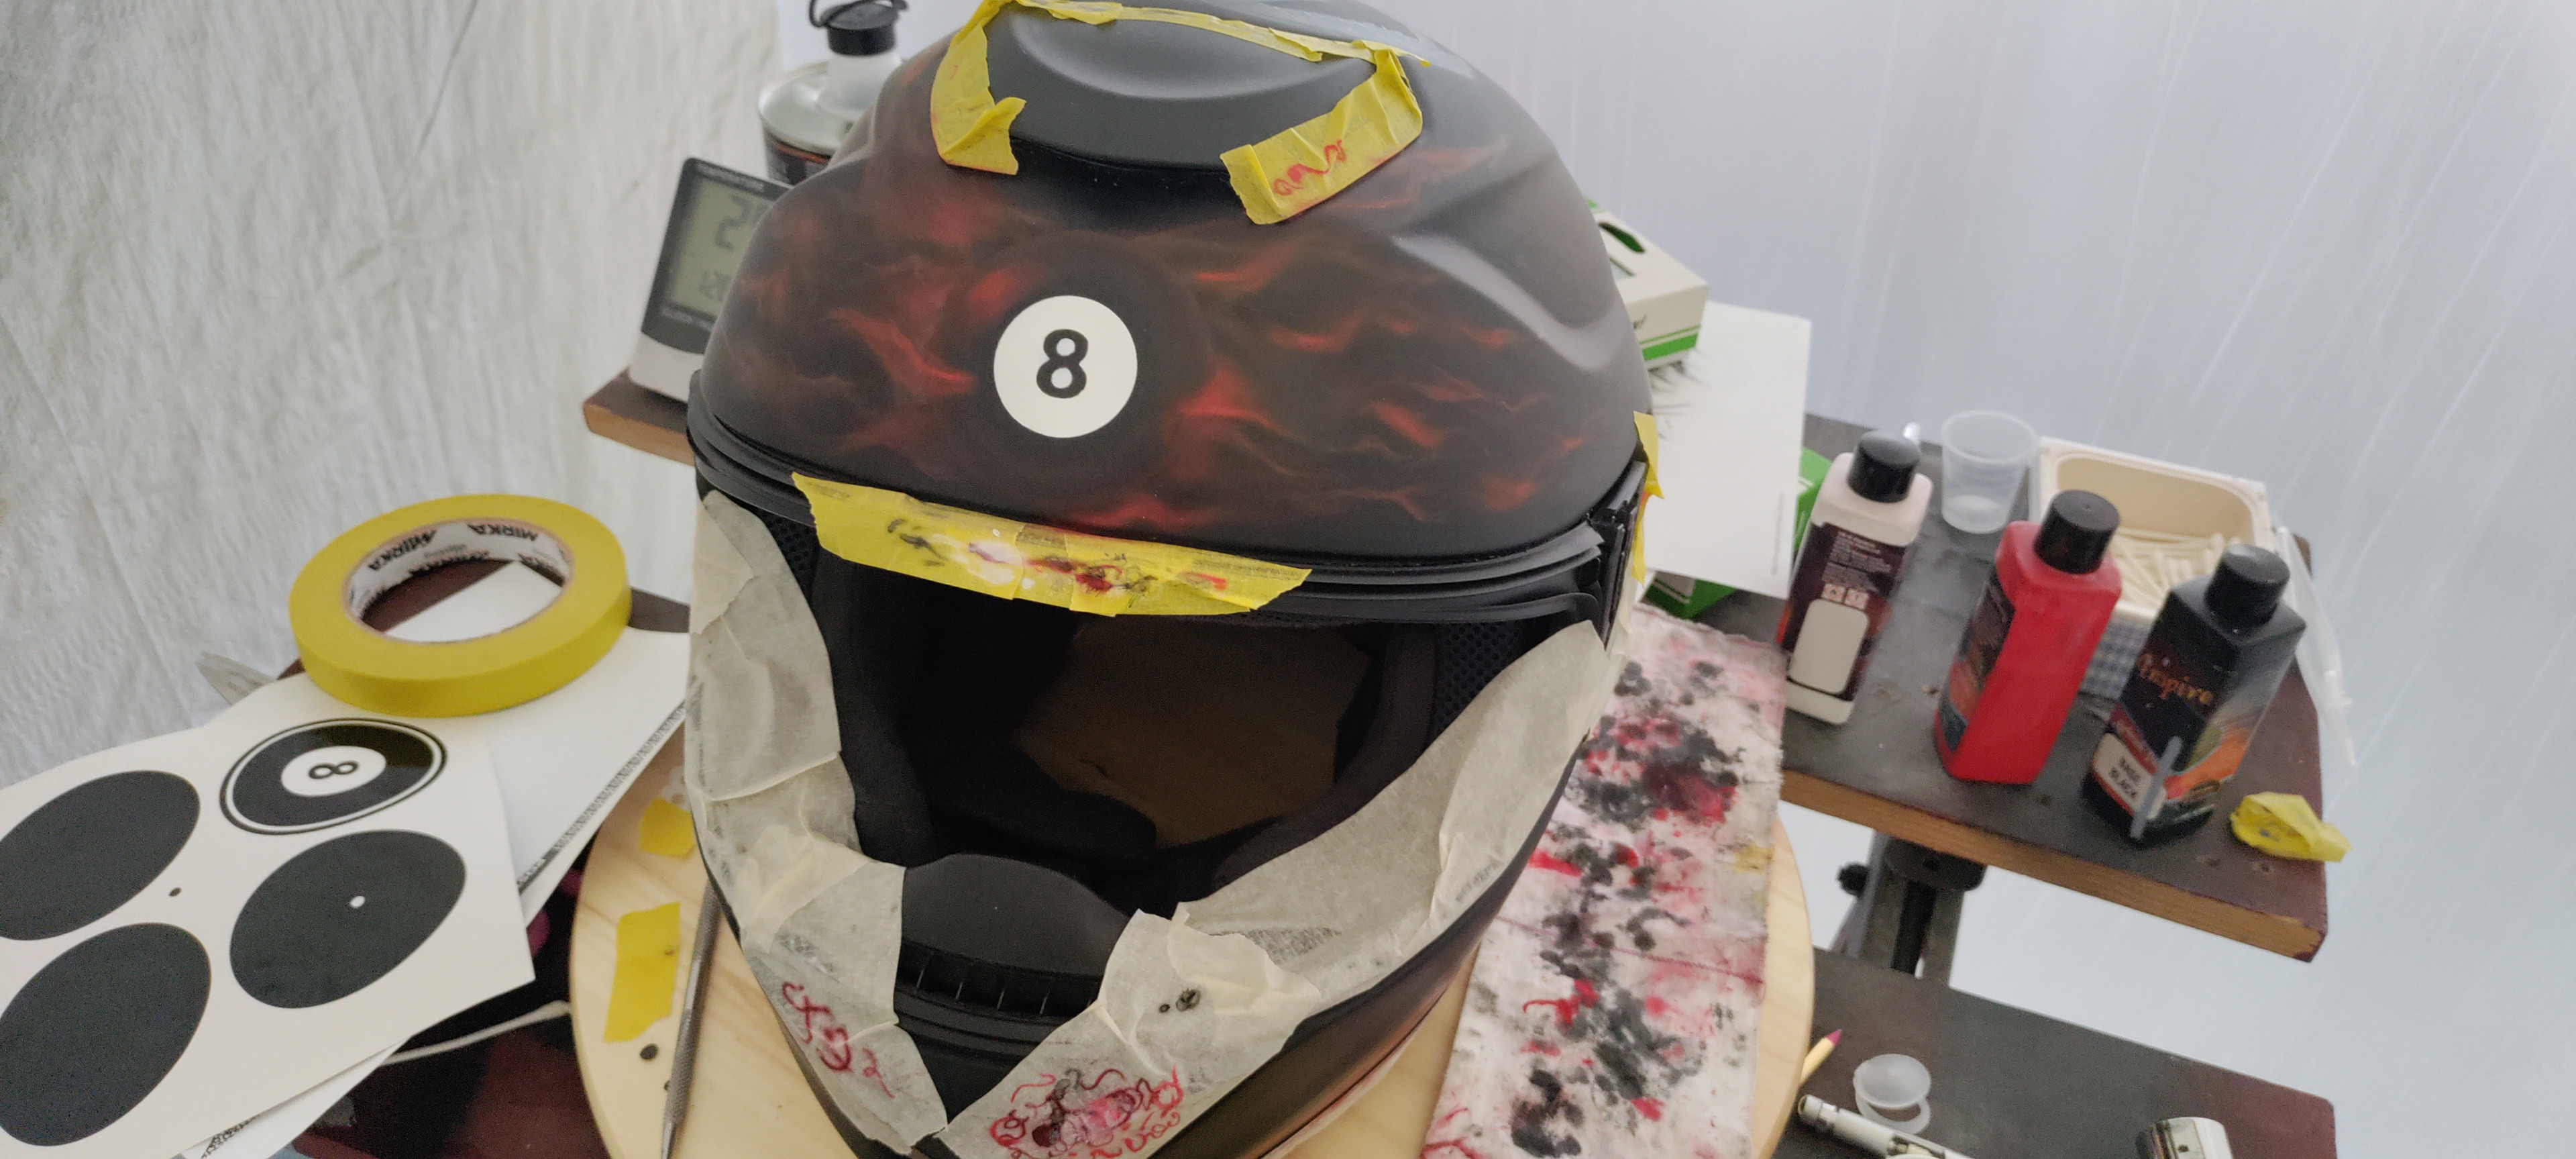 Front of the helmet was "lonely" looking and the 8-ball was important to my client, so I fitted it front on the helmet.